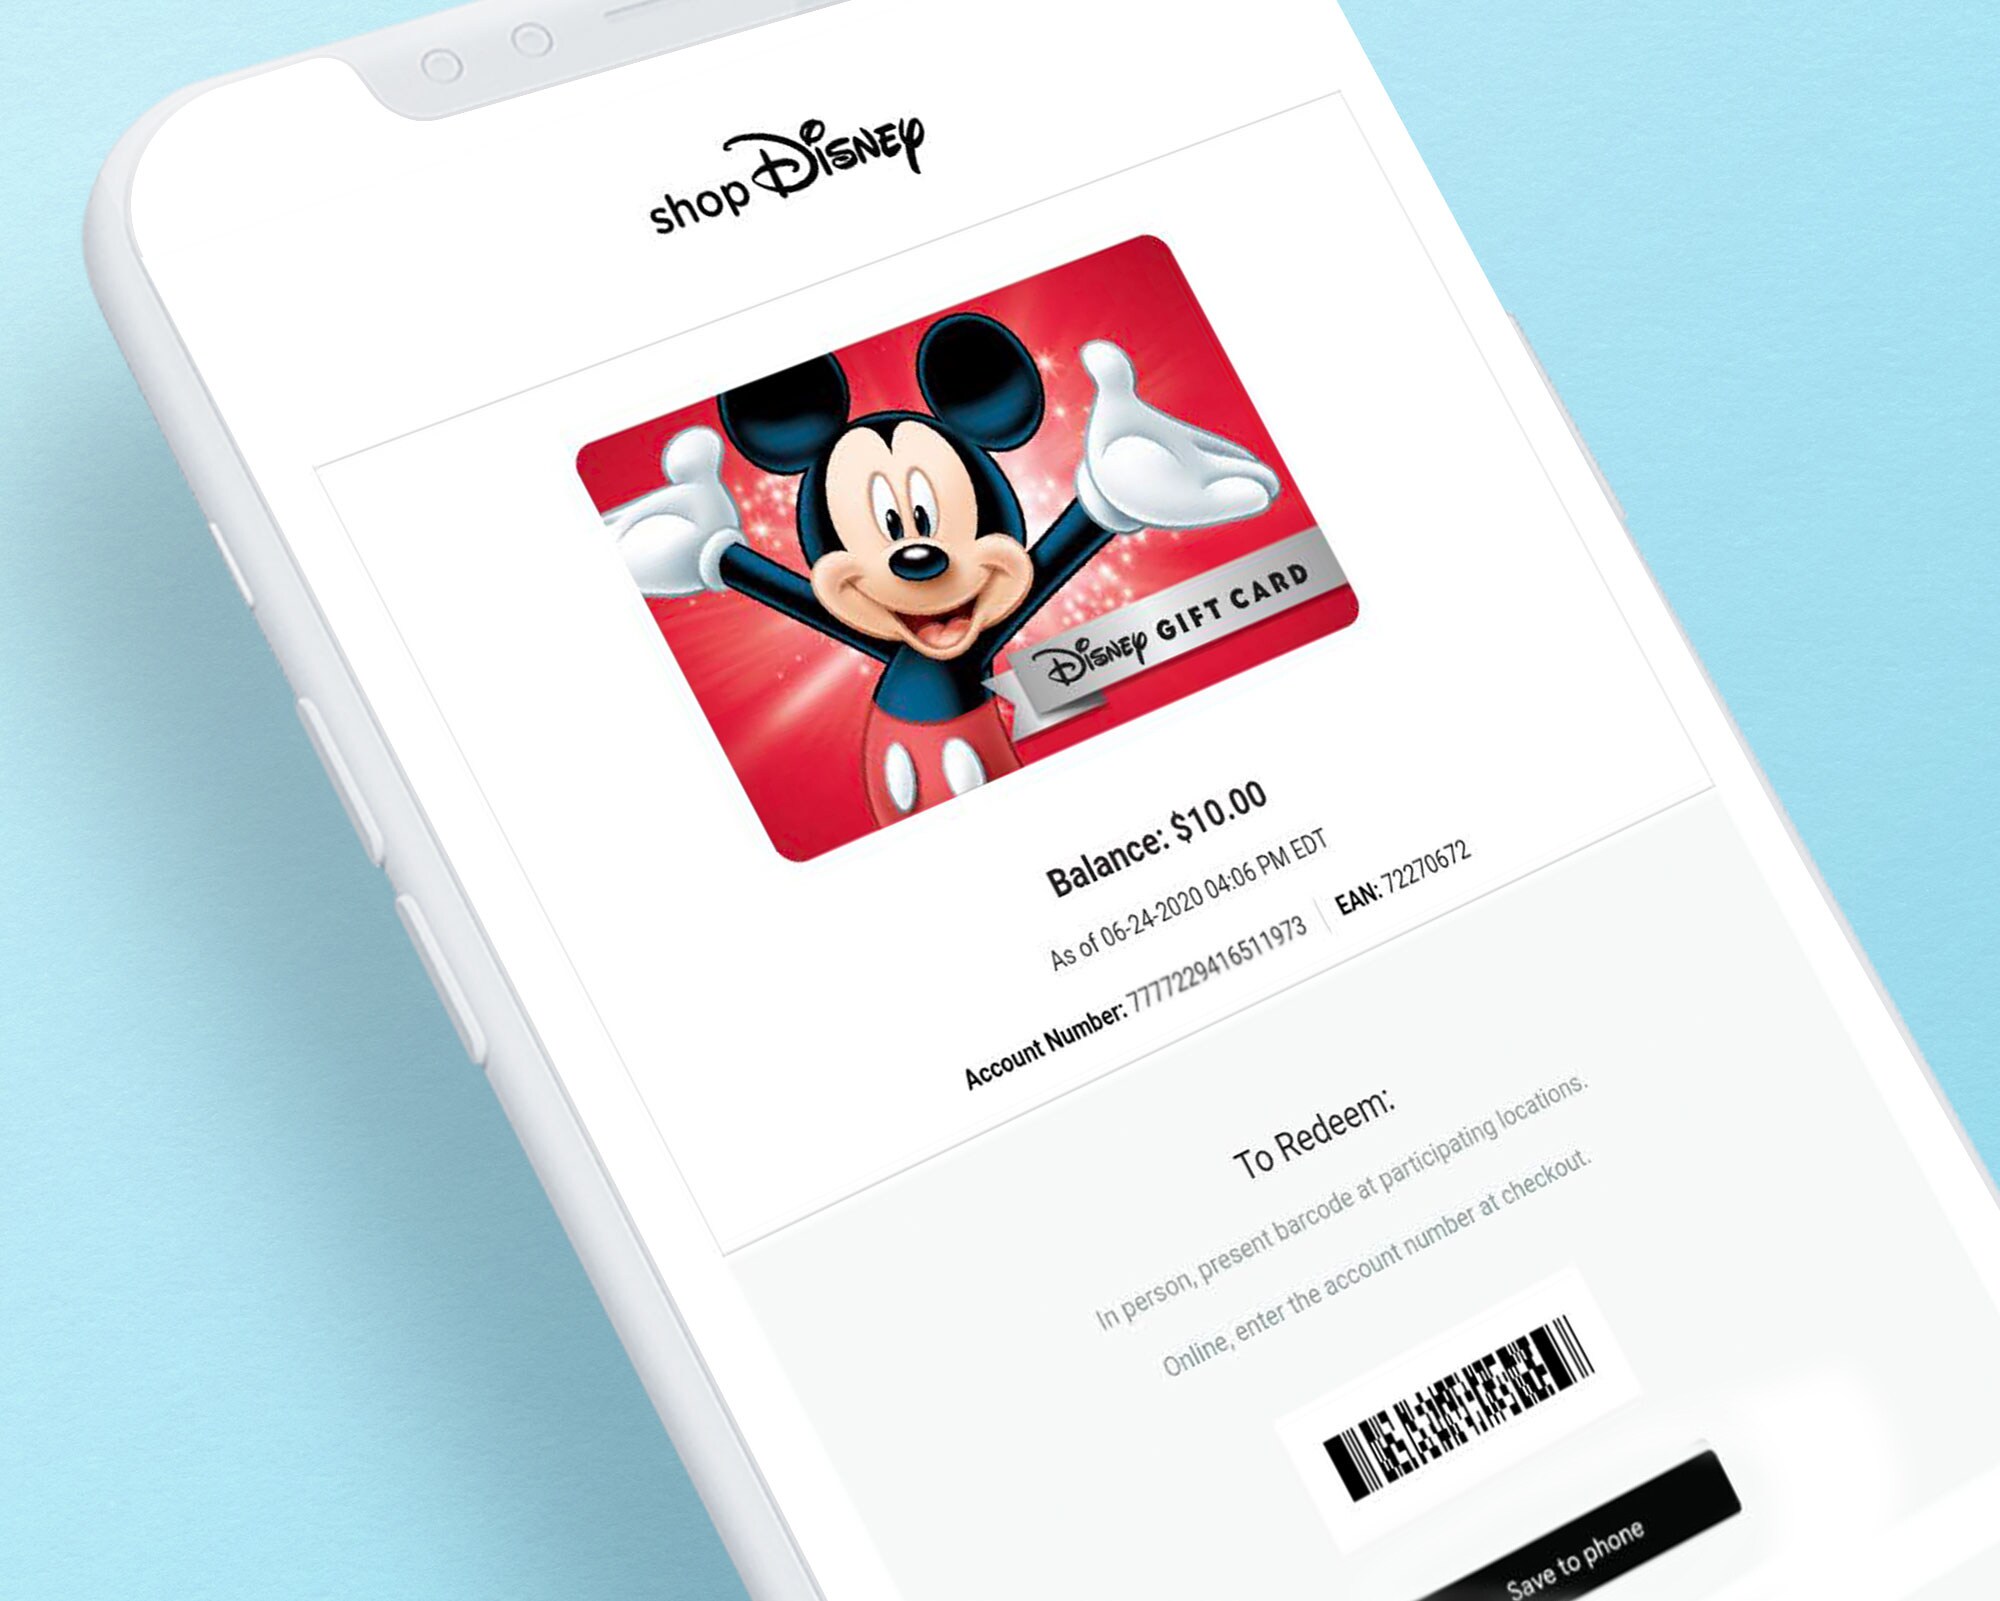 Disney Gift Cards: Your Questions Answered